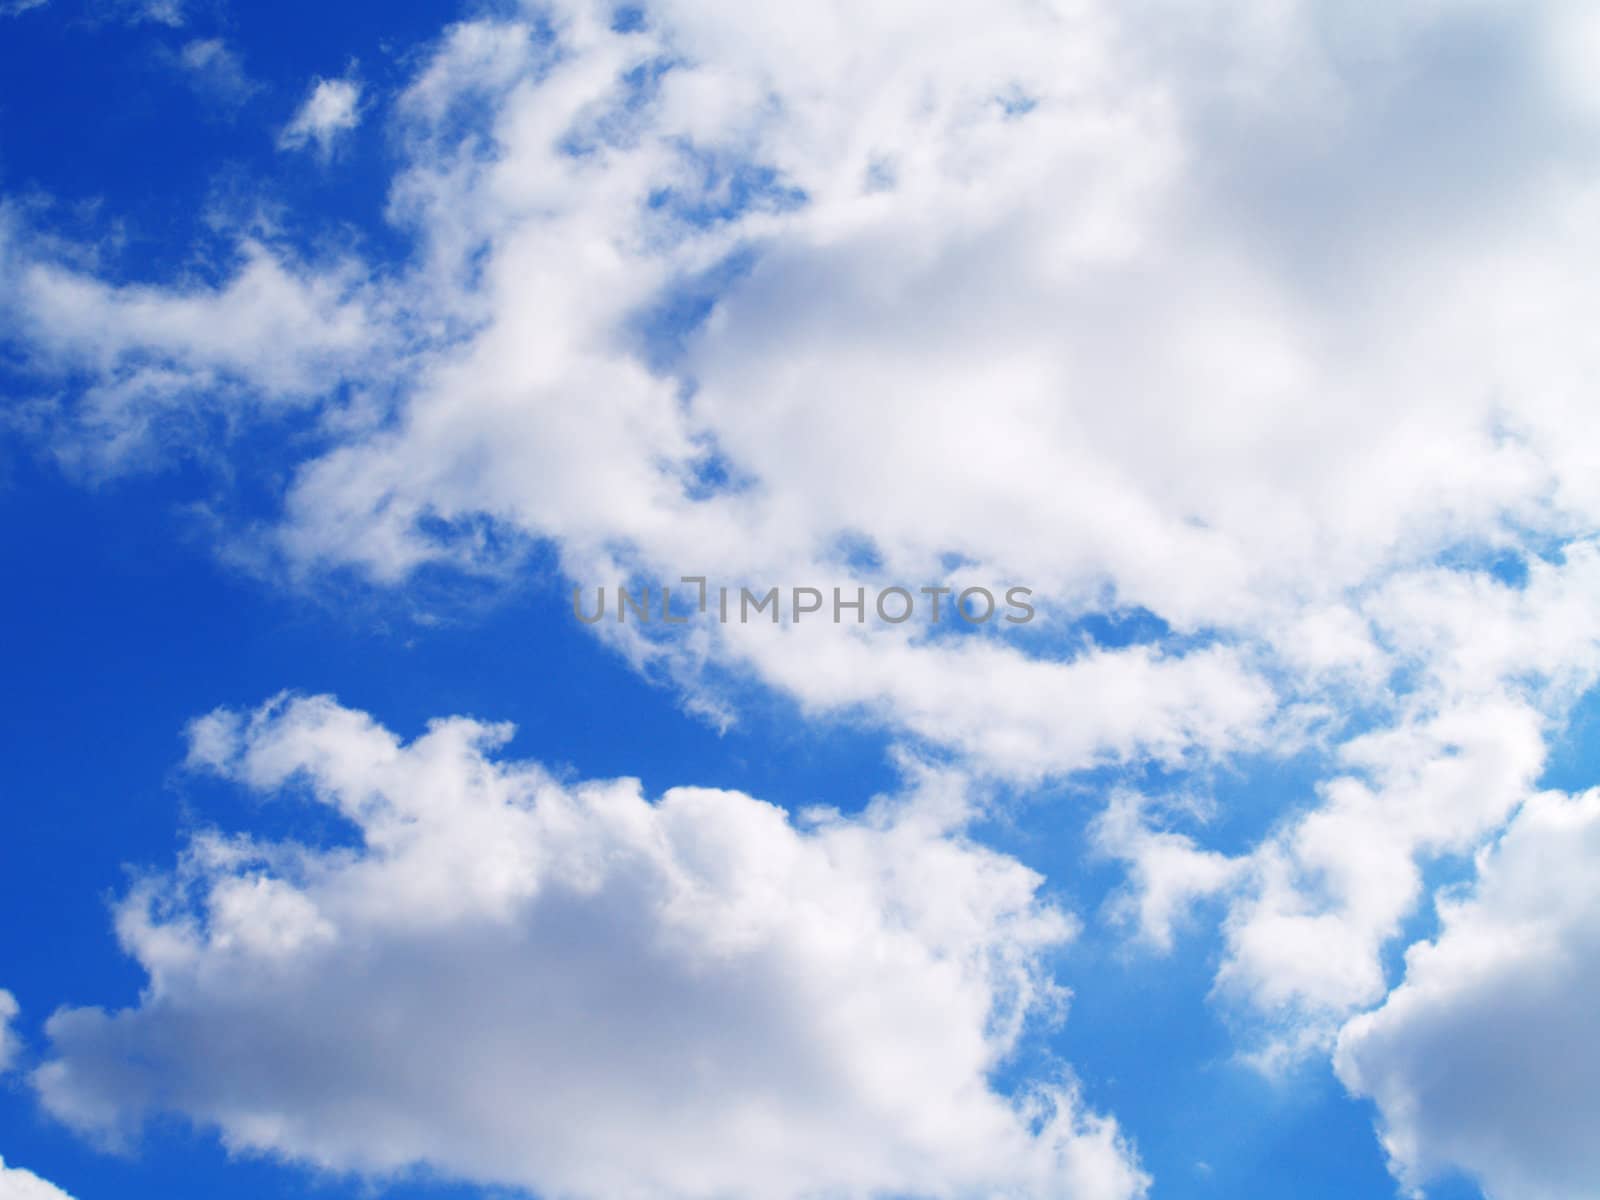 The blue sky and beautiful white clouds